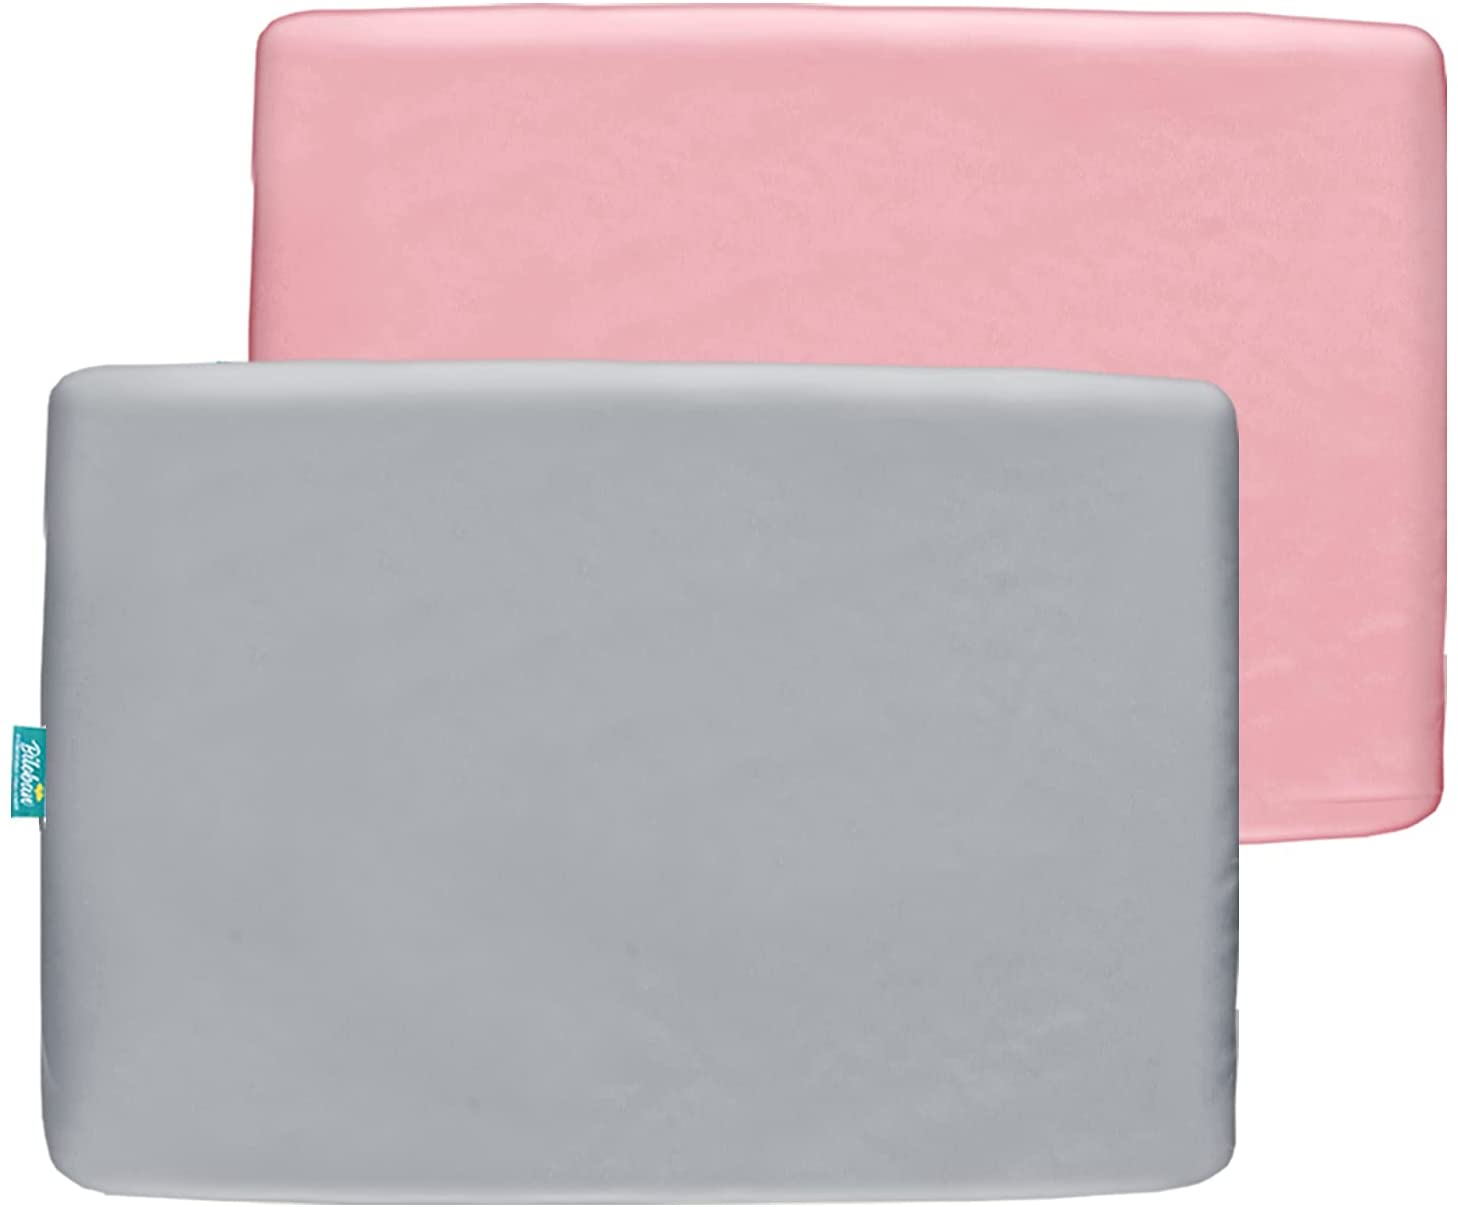 Pack n Play Fitted Sheet, 100% Silky Satin, Pink& Gray, 2 Pack - Biloban Online Store